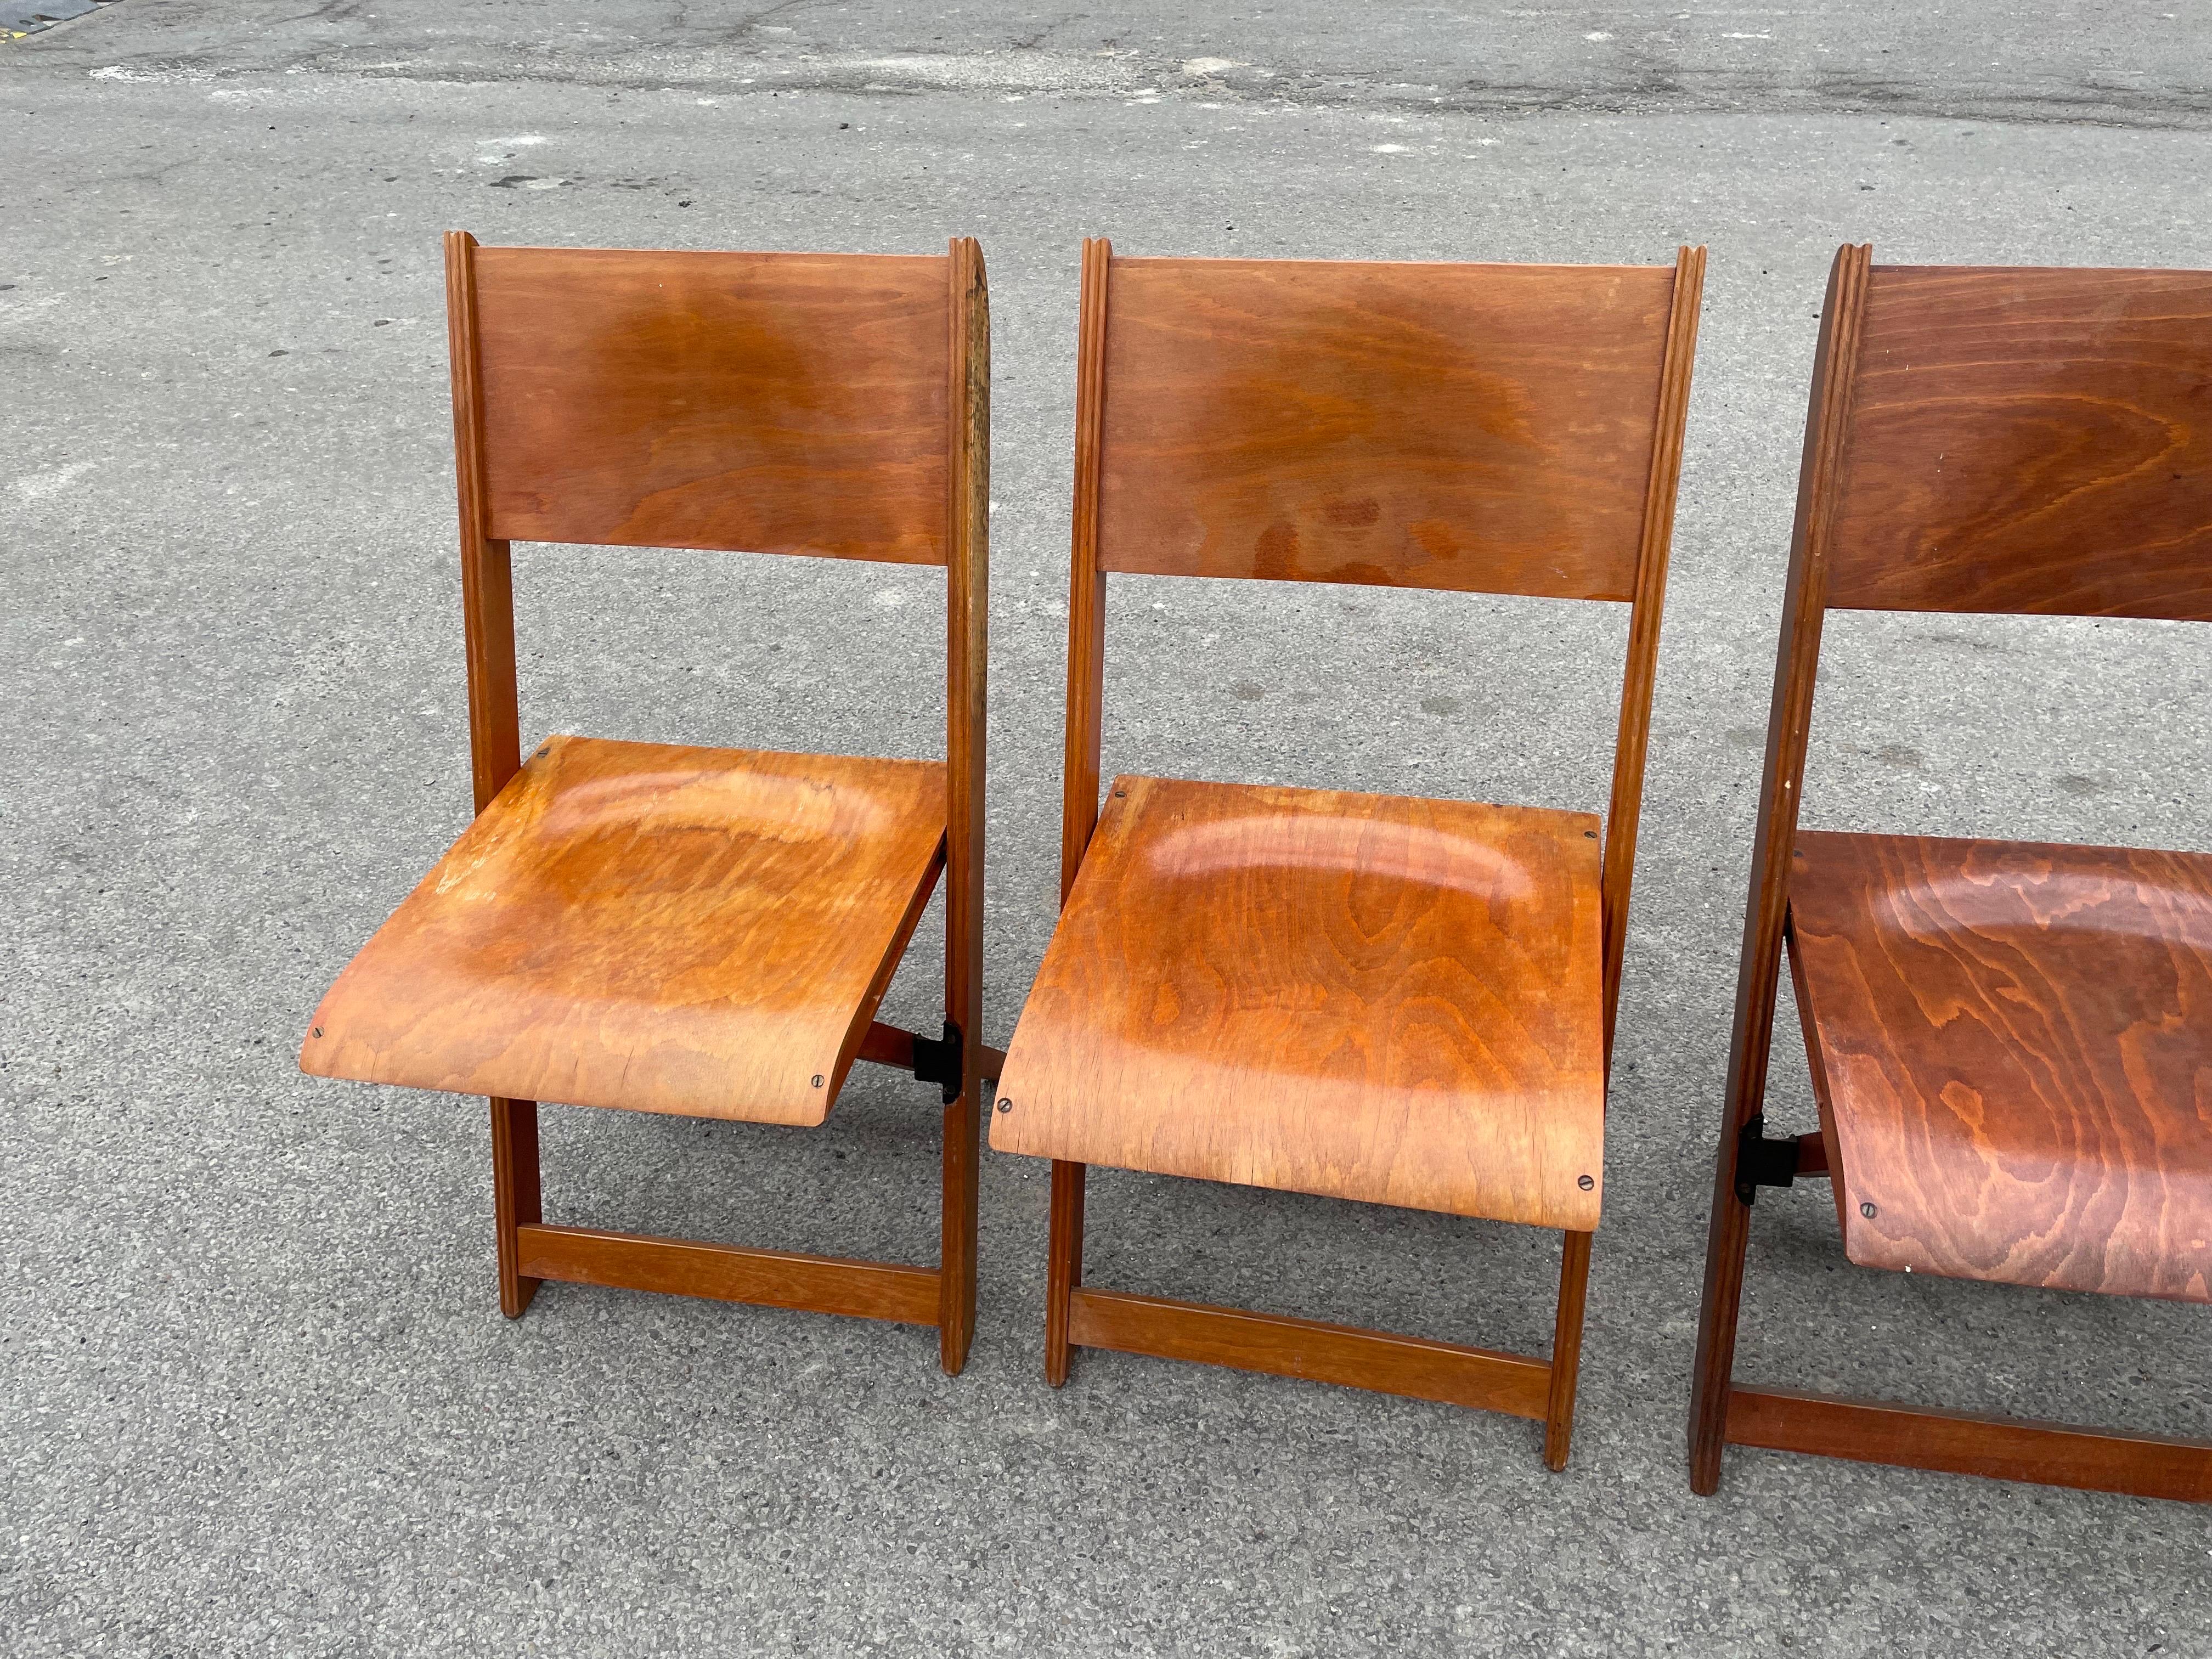 Foldable Danish Chairs from 1930’s 1